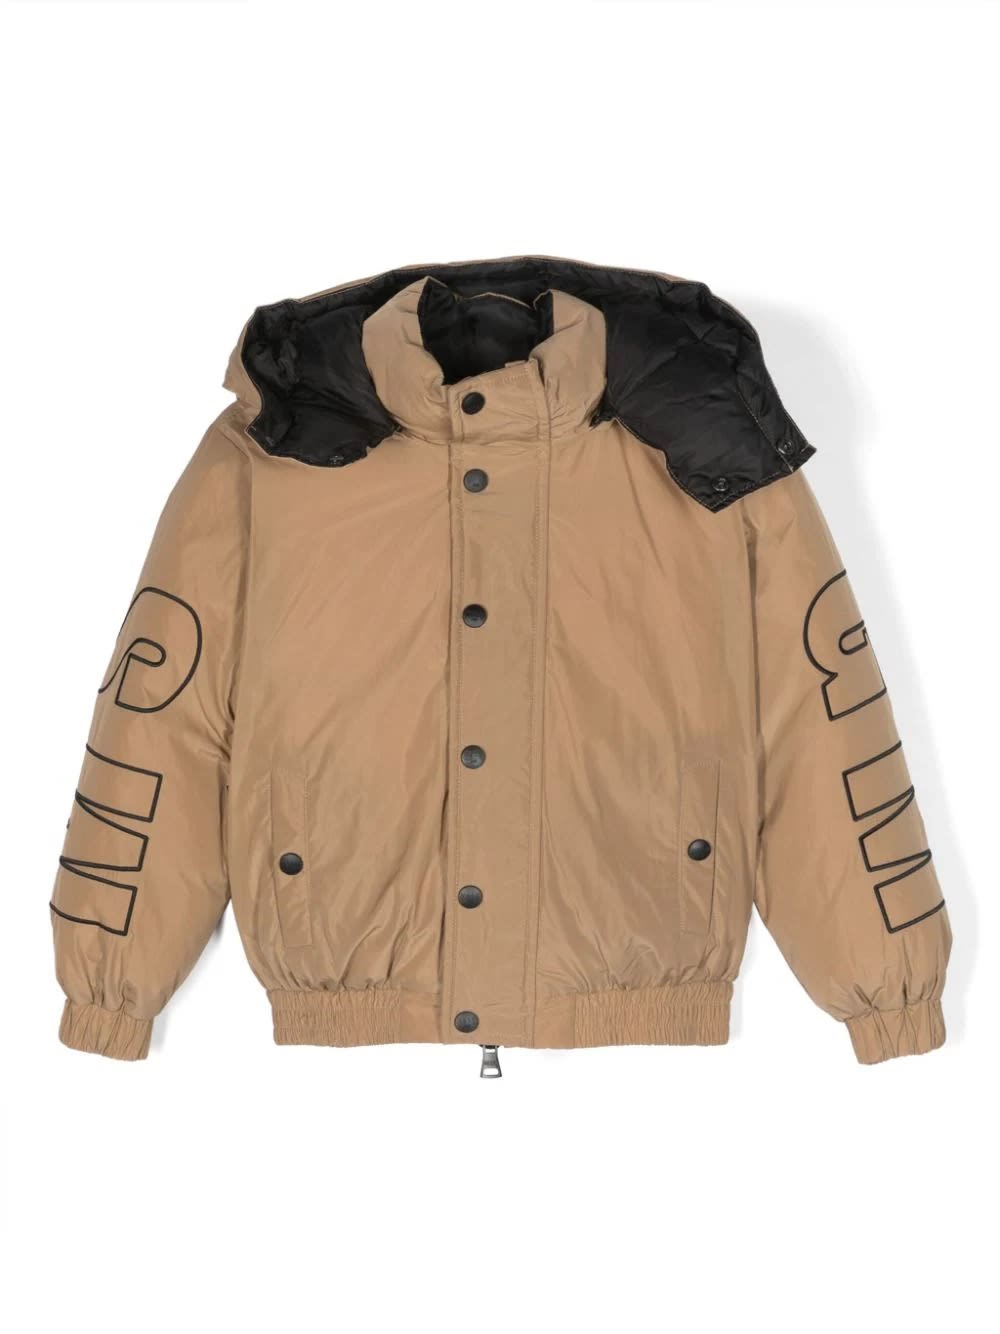 MSGM BEIGE AND BLACK PUFFER JACKET WITH LOGO